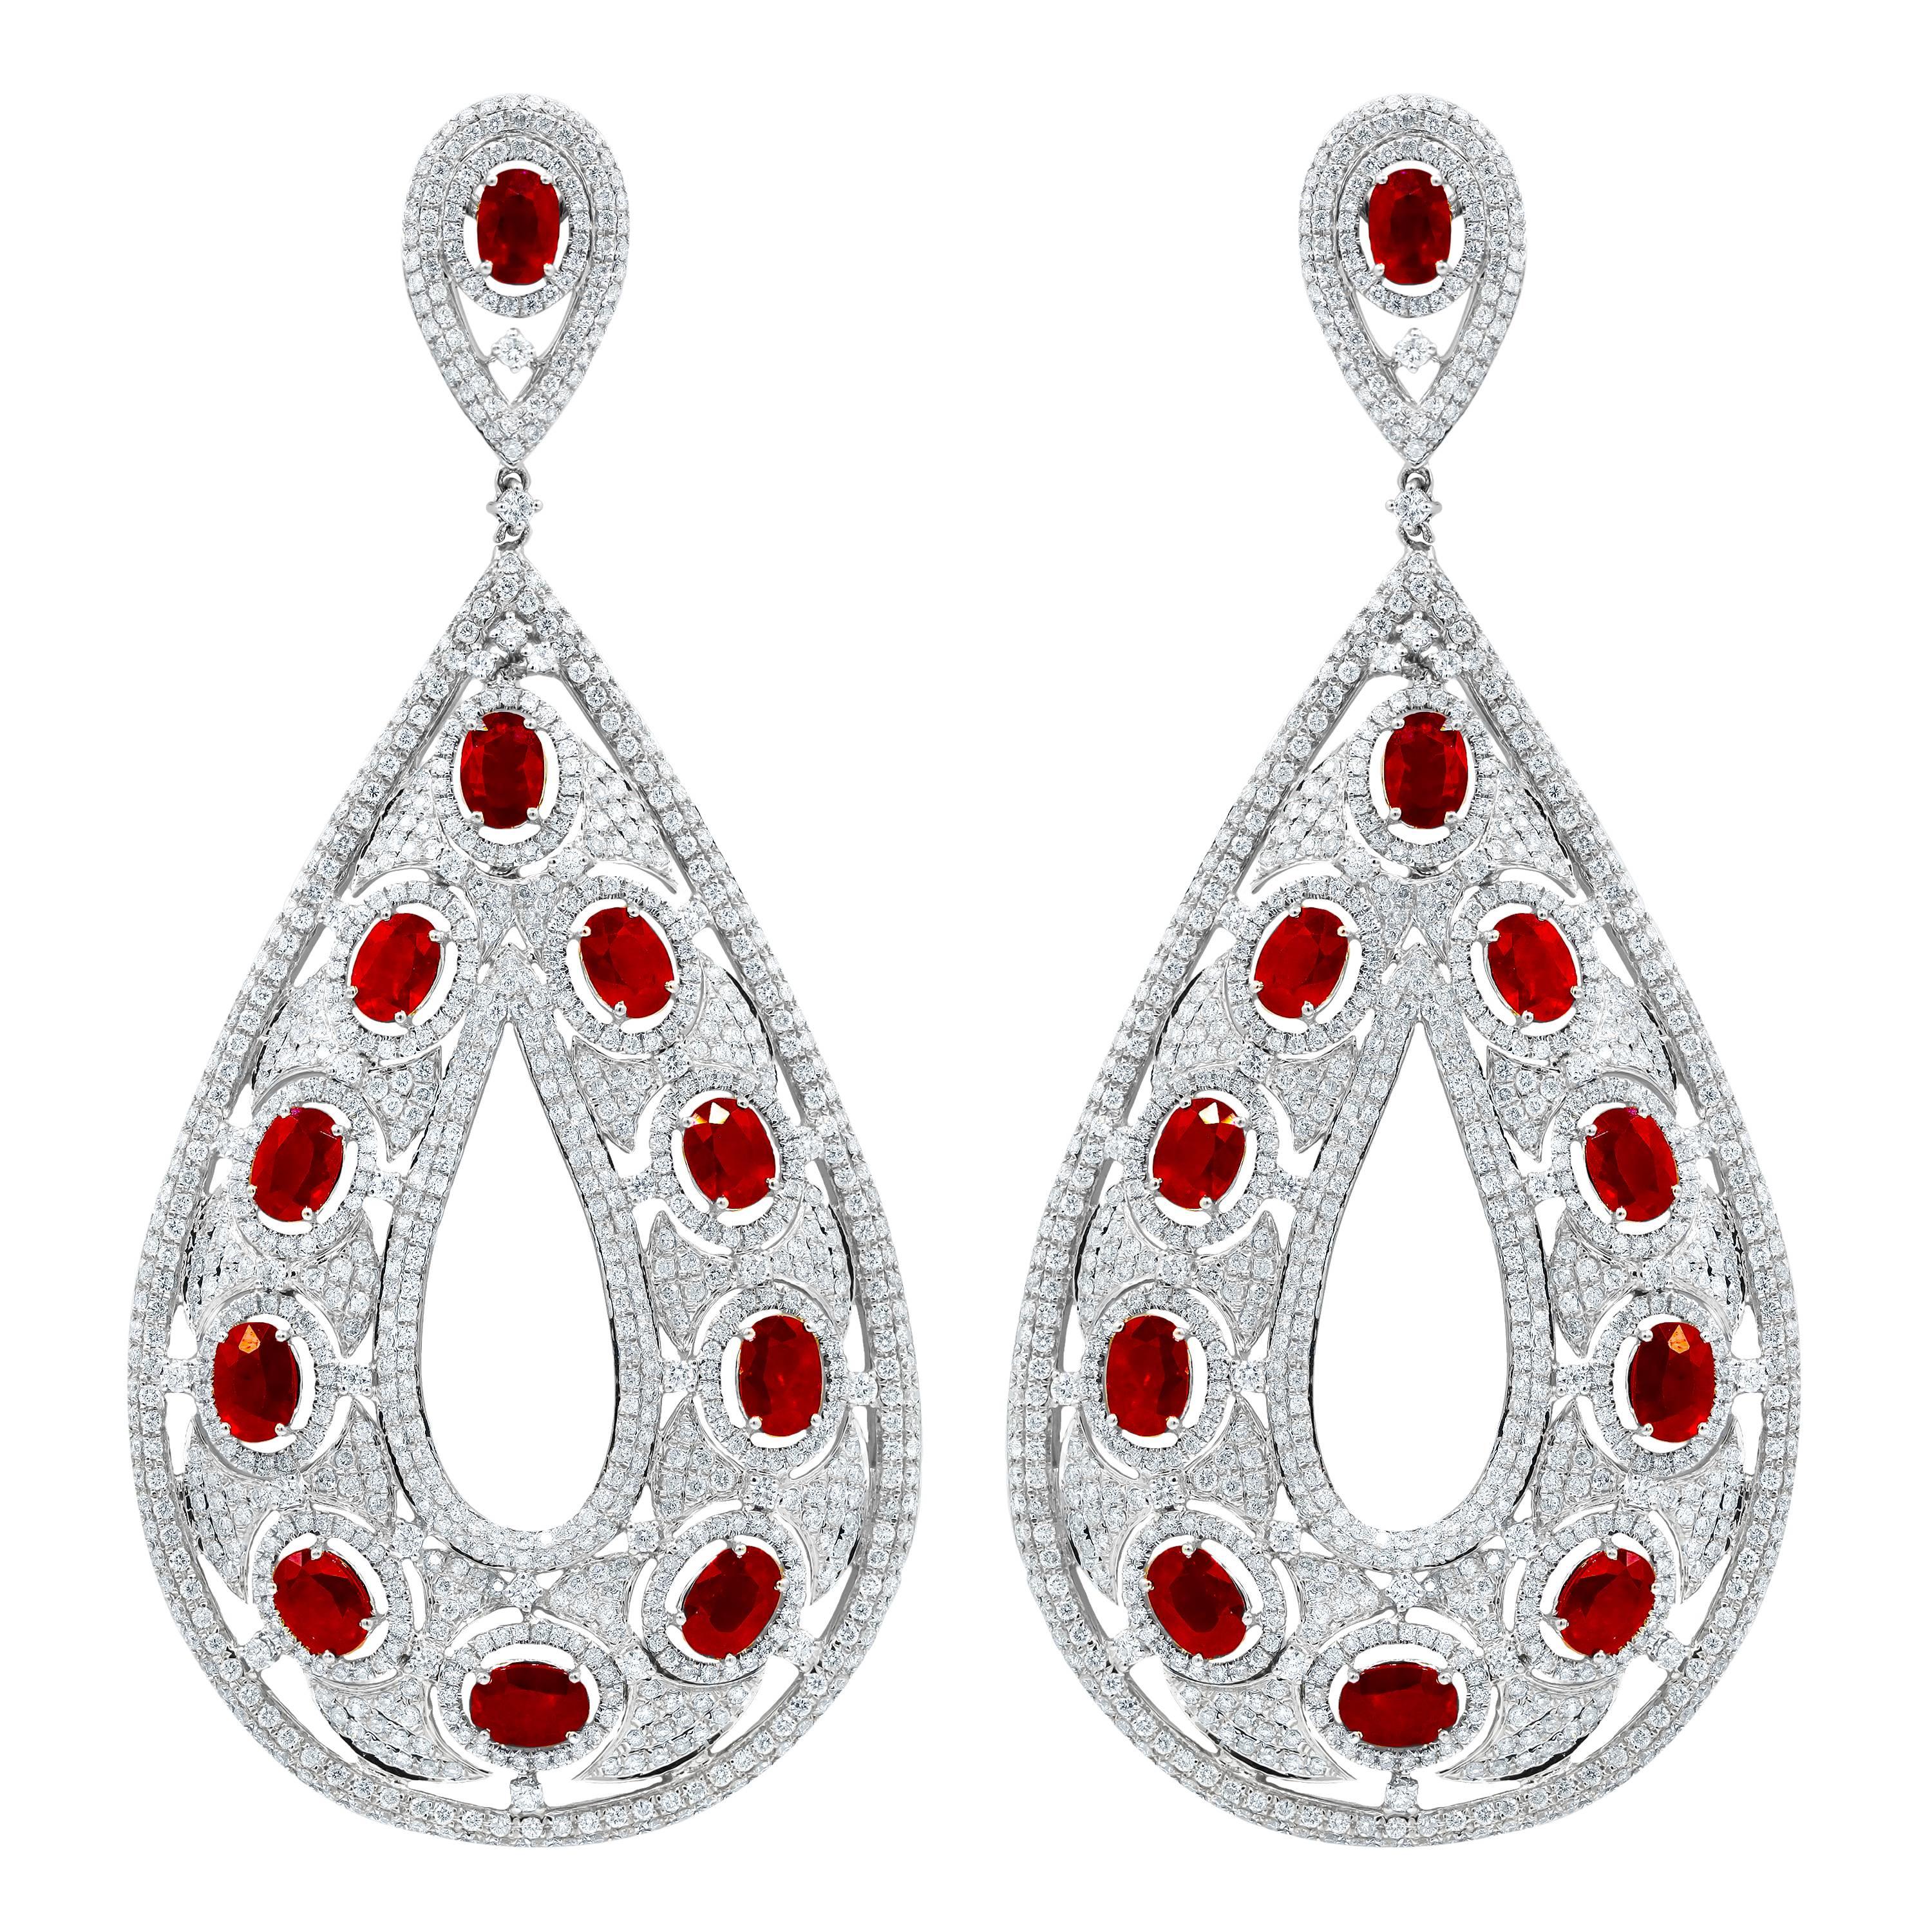 Diana M Ruby and Diamond Hanging Earrings